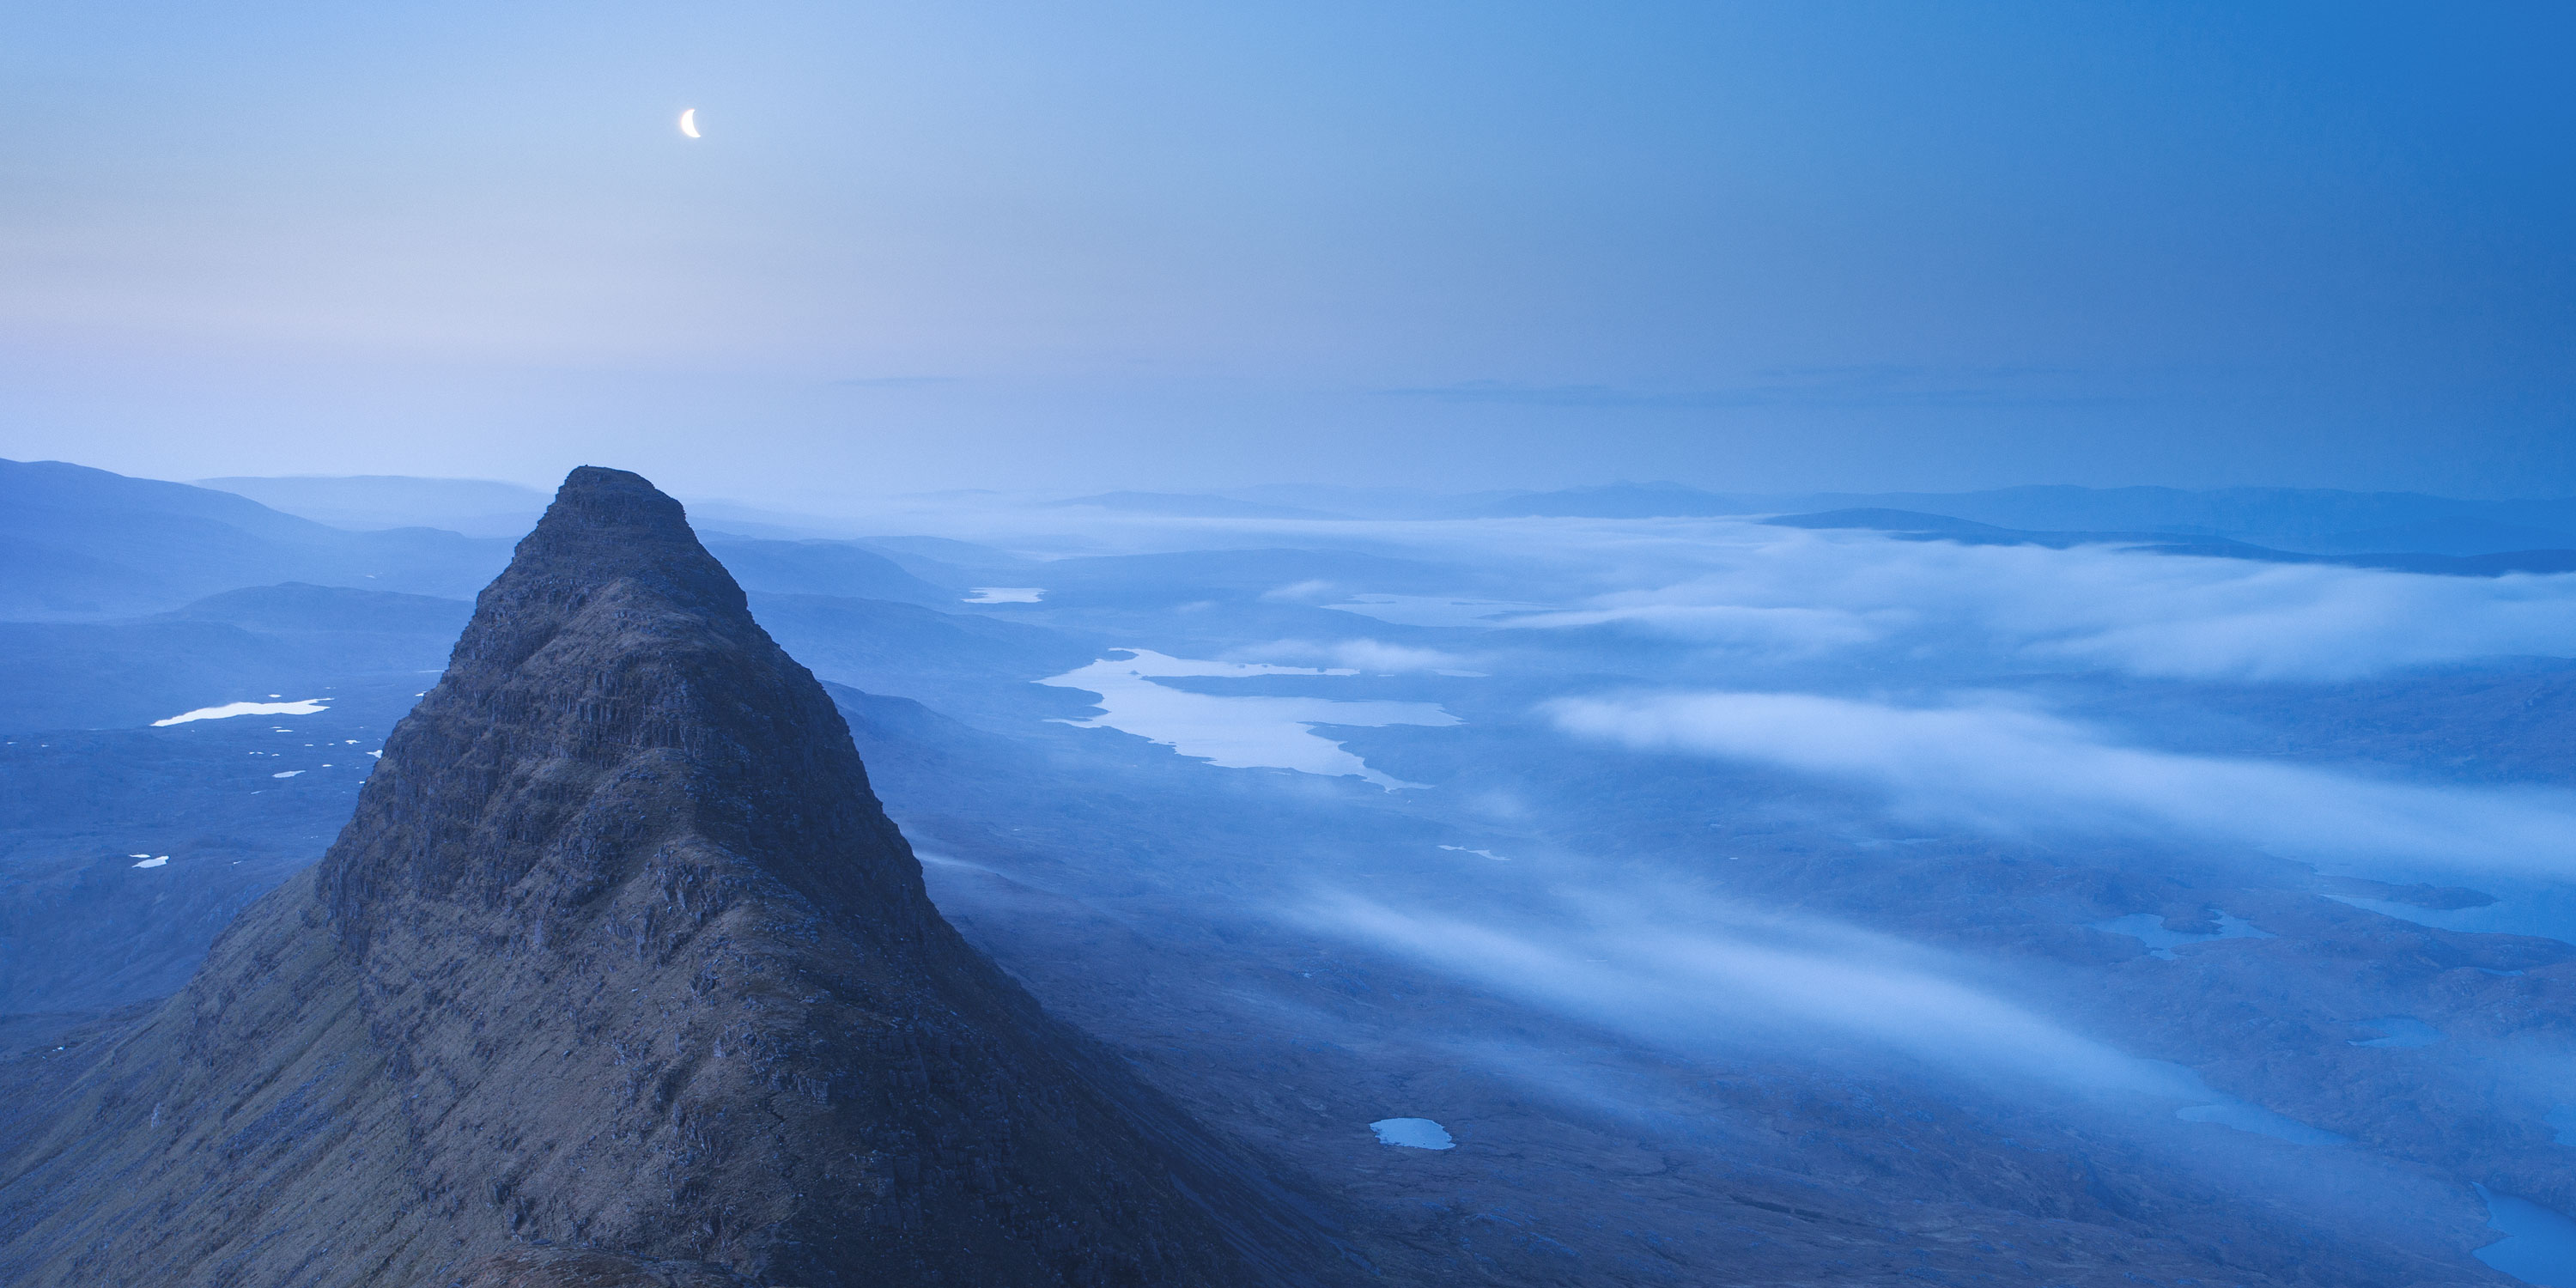 Meal Meadonach from Suilven before sunrise with a crescent moon overhead